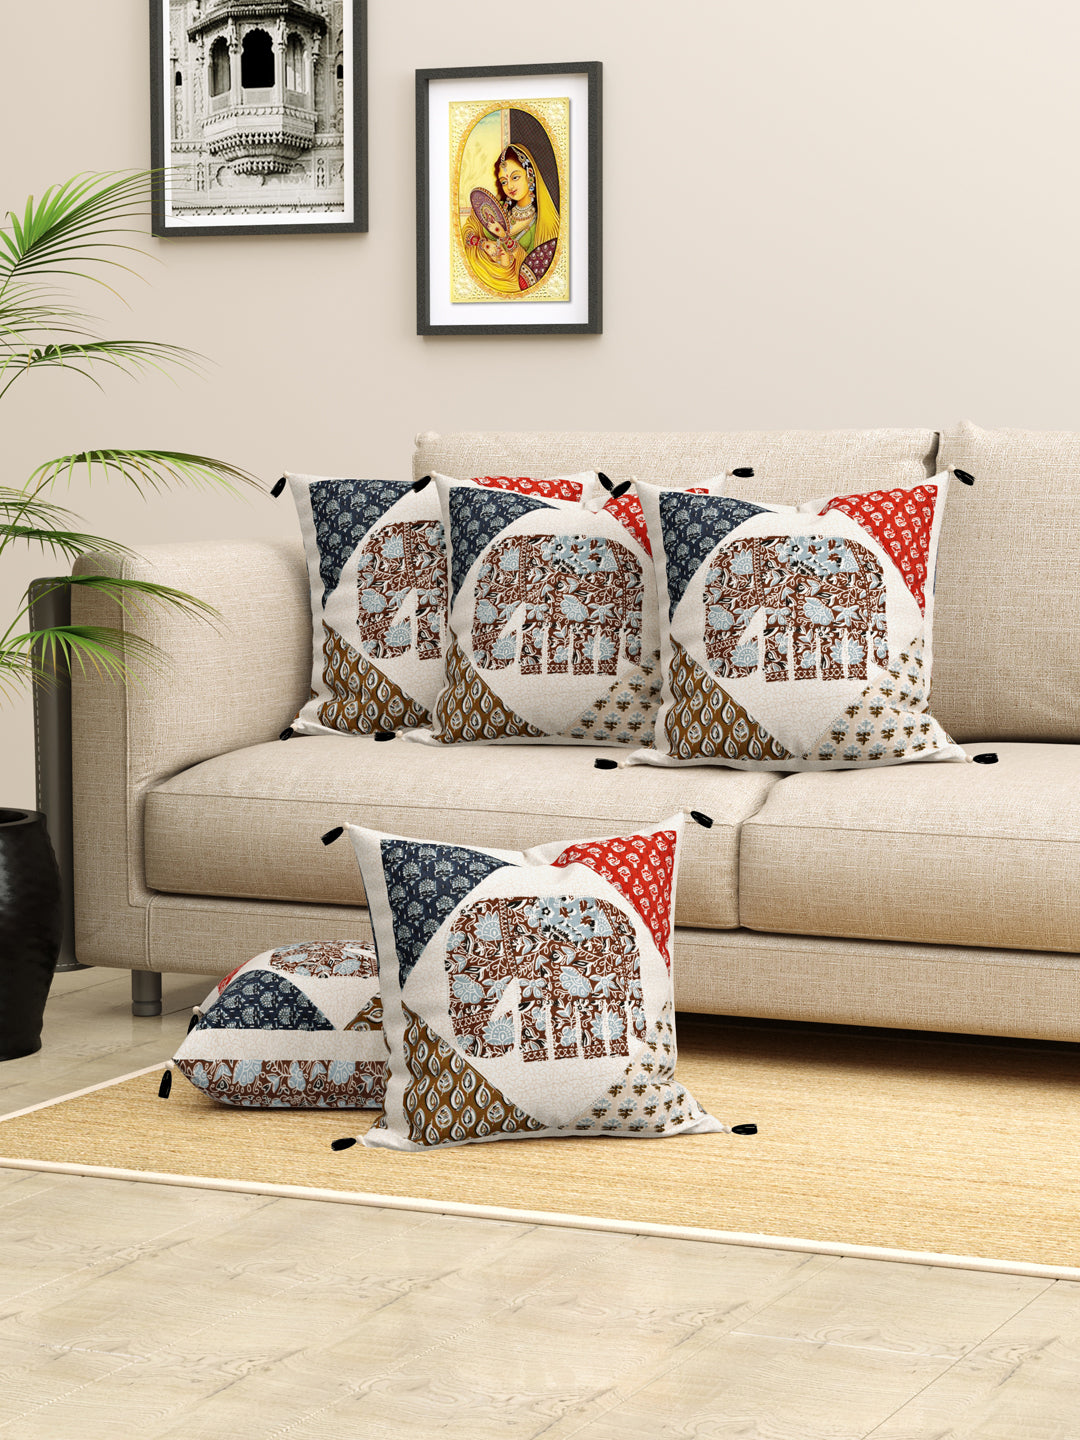 Living Roots Elephant Patchwork Cotton Cushion Cover- Set of 5 (40-028-B)